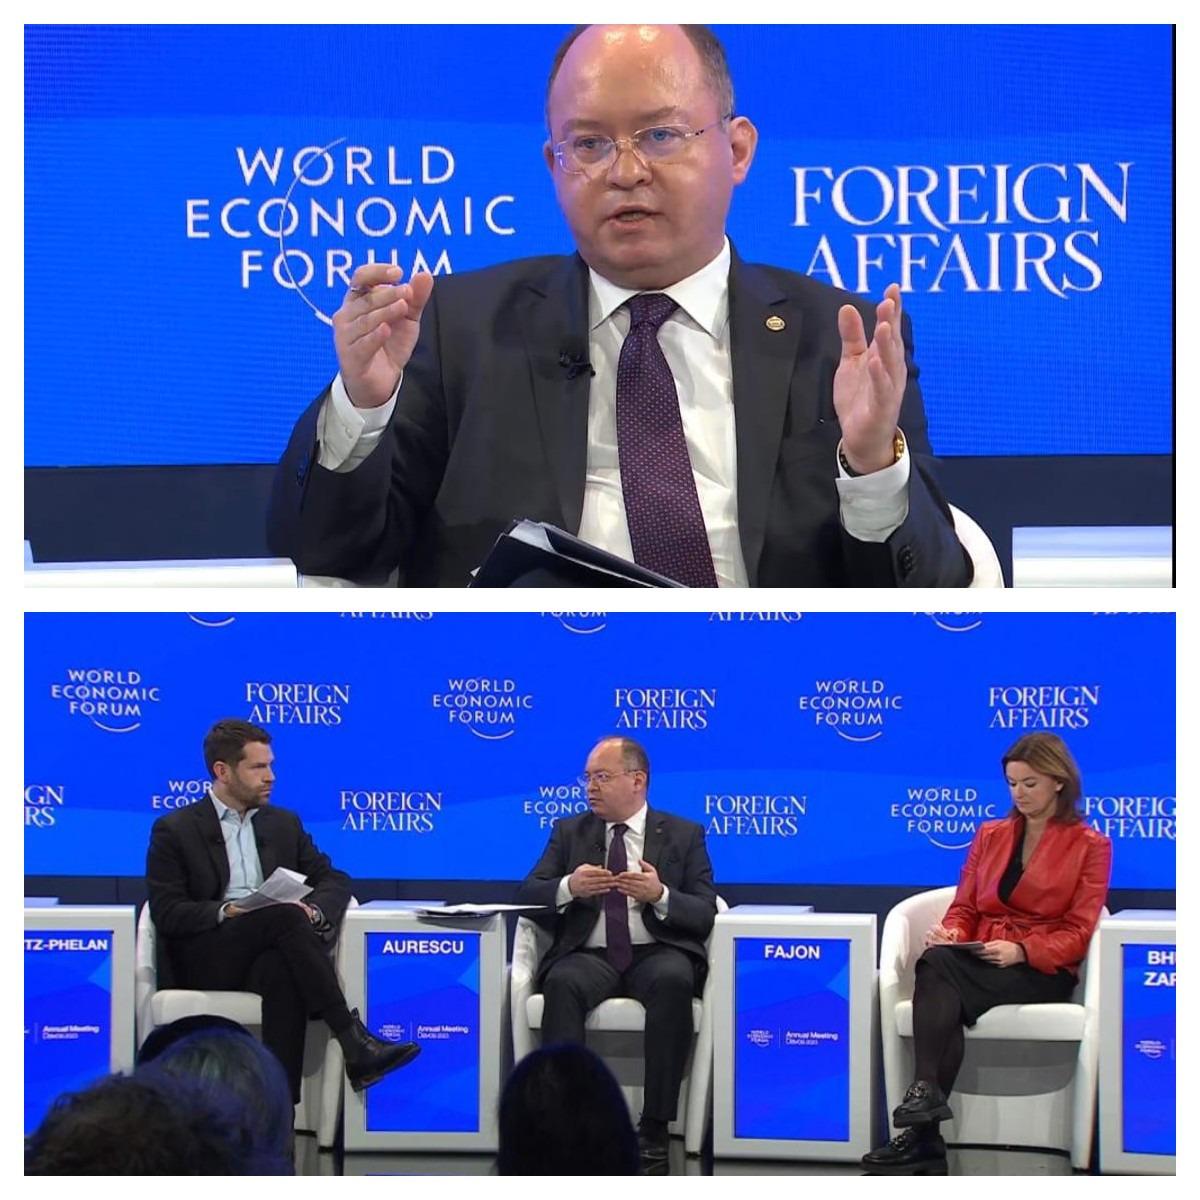 Insightful discussion at #WEF23 on “A New Helsinki for the World” w/@tfajon @BBhuttoZardari @JaneHarmanCA, under the able guidance of @dankurtzphelan.When defending the Euro-Atlantic security architecture & int'l rules-based order,we can no longer afford any“strategic ambiguity”! https://t.co/GhaLR2041O